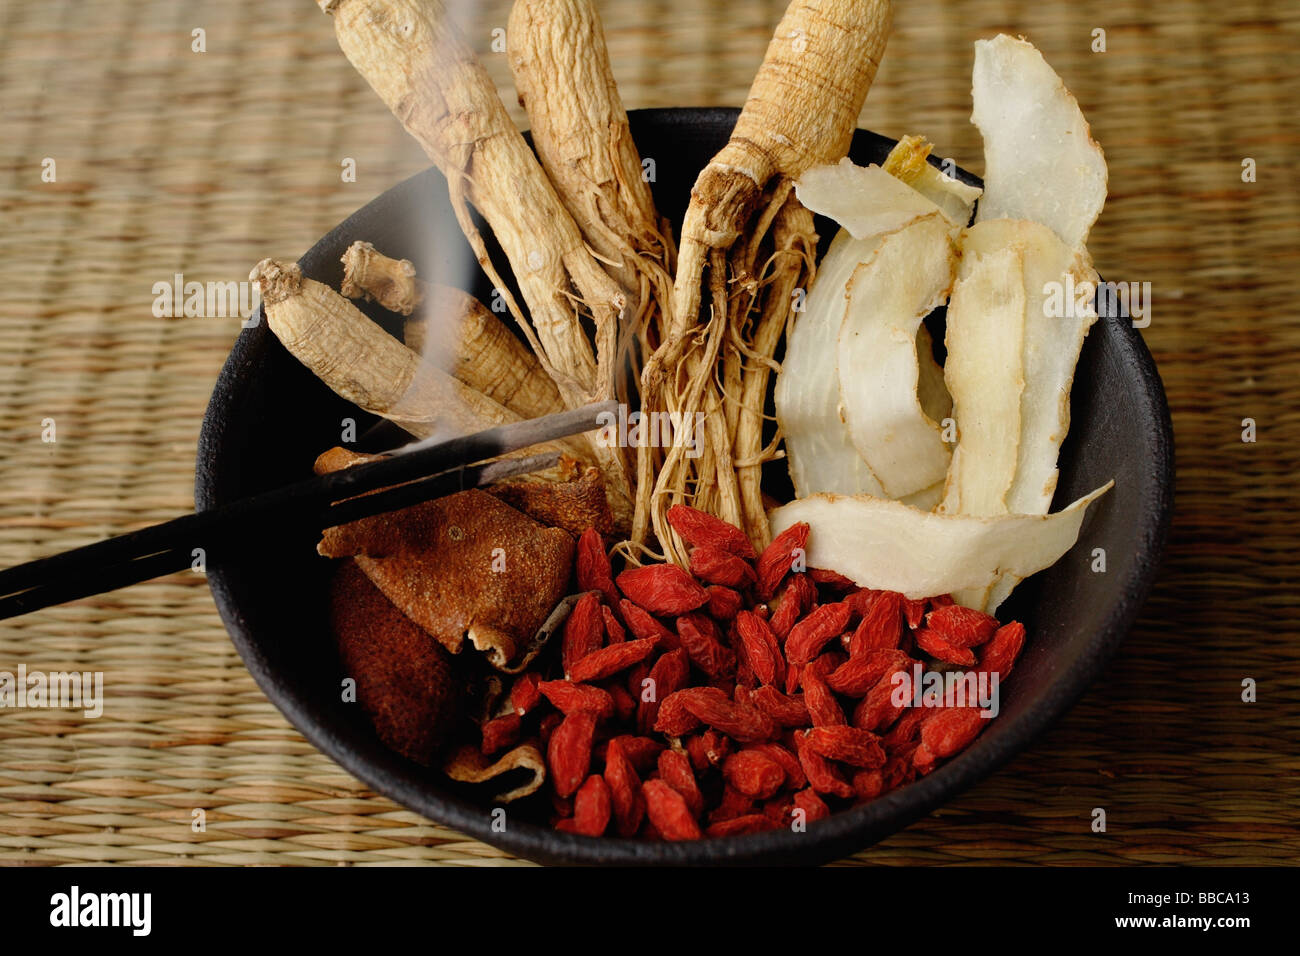 Bowl filled with Chinese medicinal herbs Stock Photo